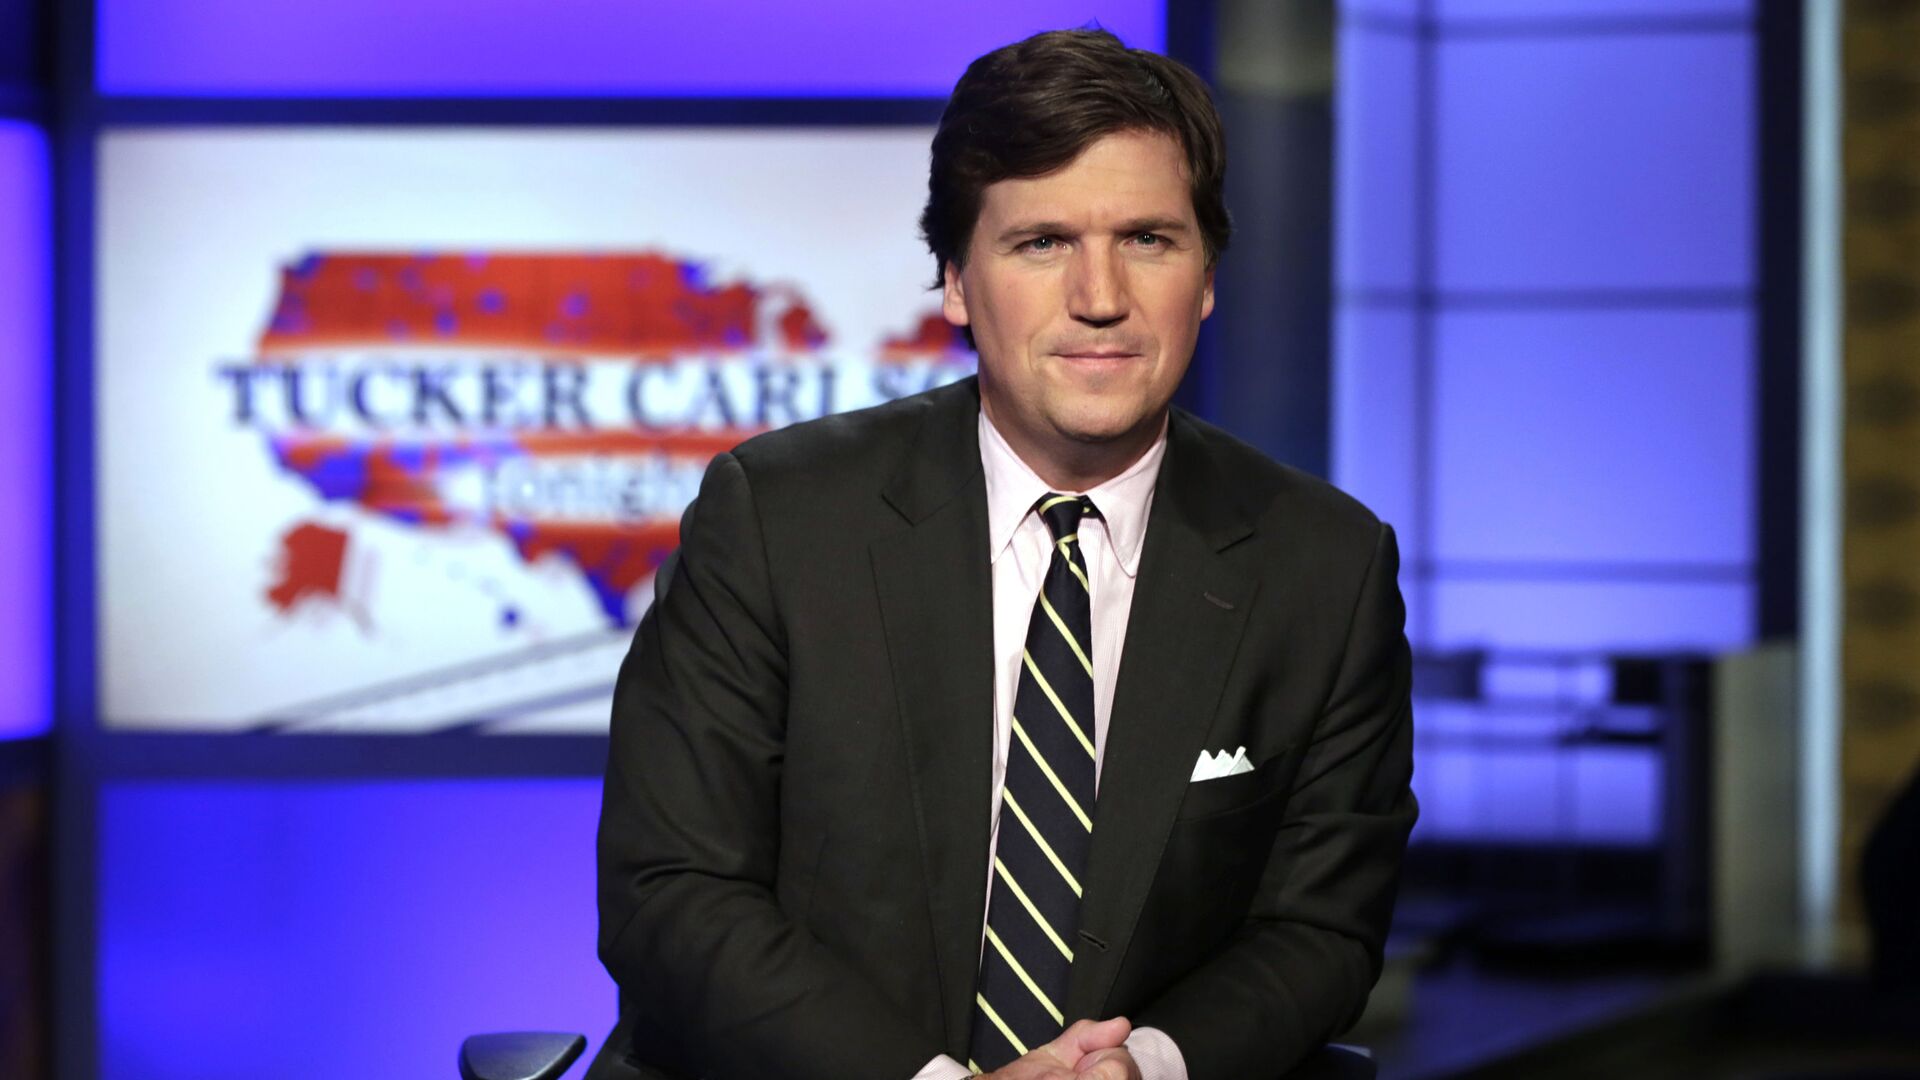 FILE - In this March 2, 2017 file photo, Tucker Carlson, host of Tucker Carlson Tonight, poses for photos in a Fox News Channel studio, in New York. Carlson, who on Monday's show addressed the story of his former top writer, Blake Neff, who resigned after CNN found he had written a series of controversial tweets under a pseudonym, has left for vacation. It fits a pattern at Fox, whose personalities tend to go away to cool off when the heat is on. Carlson's vacation is the sixth example in a little more than three years. A Fox representative confirmed Carlson's vacation was planned before the Neff story broke. (AP Photo/Richard Drew, File) - Sputnik International, 1920, 29.06.2021